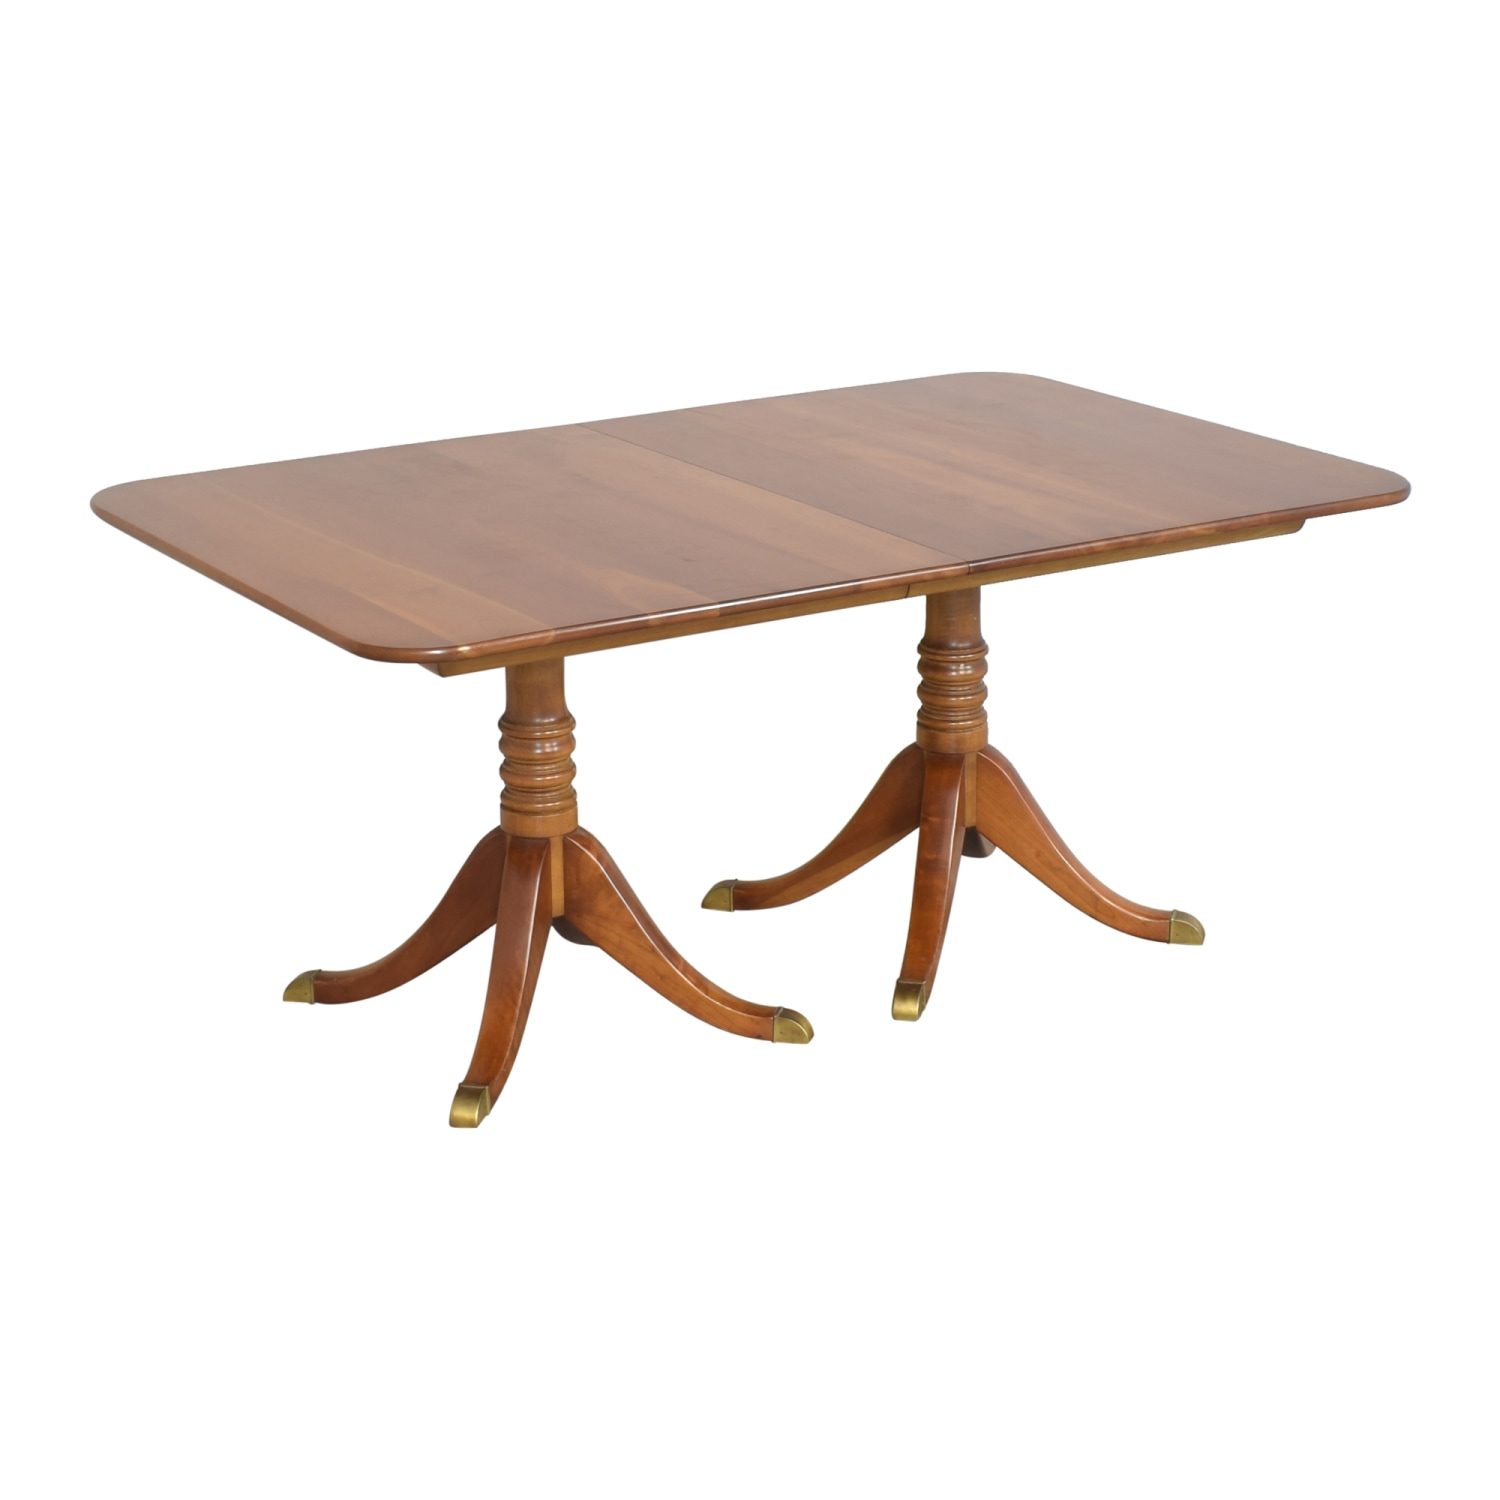 Stickley Furniture Stickley Furniture Double Pedestal Extendable Dining Table brown